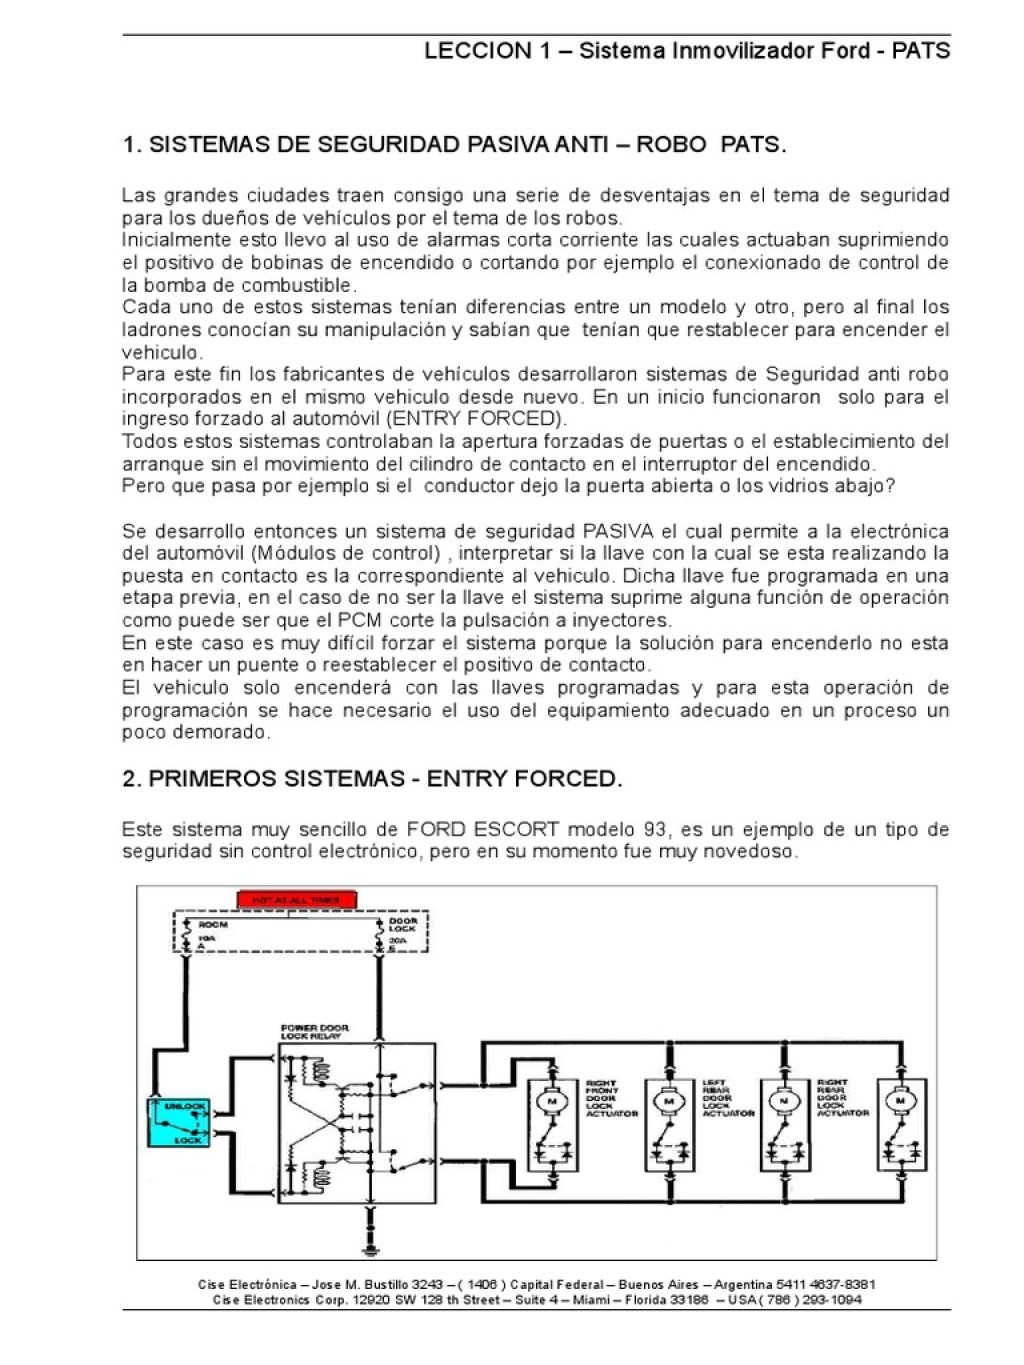 Picture of: Manual de Pats – Ford   PDF  Buenos Aires  Coche